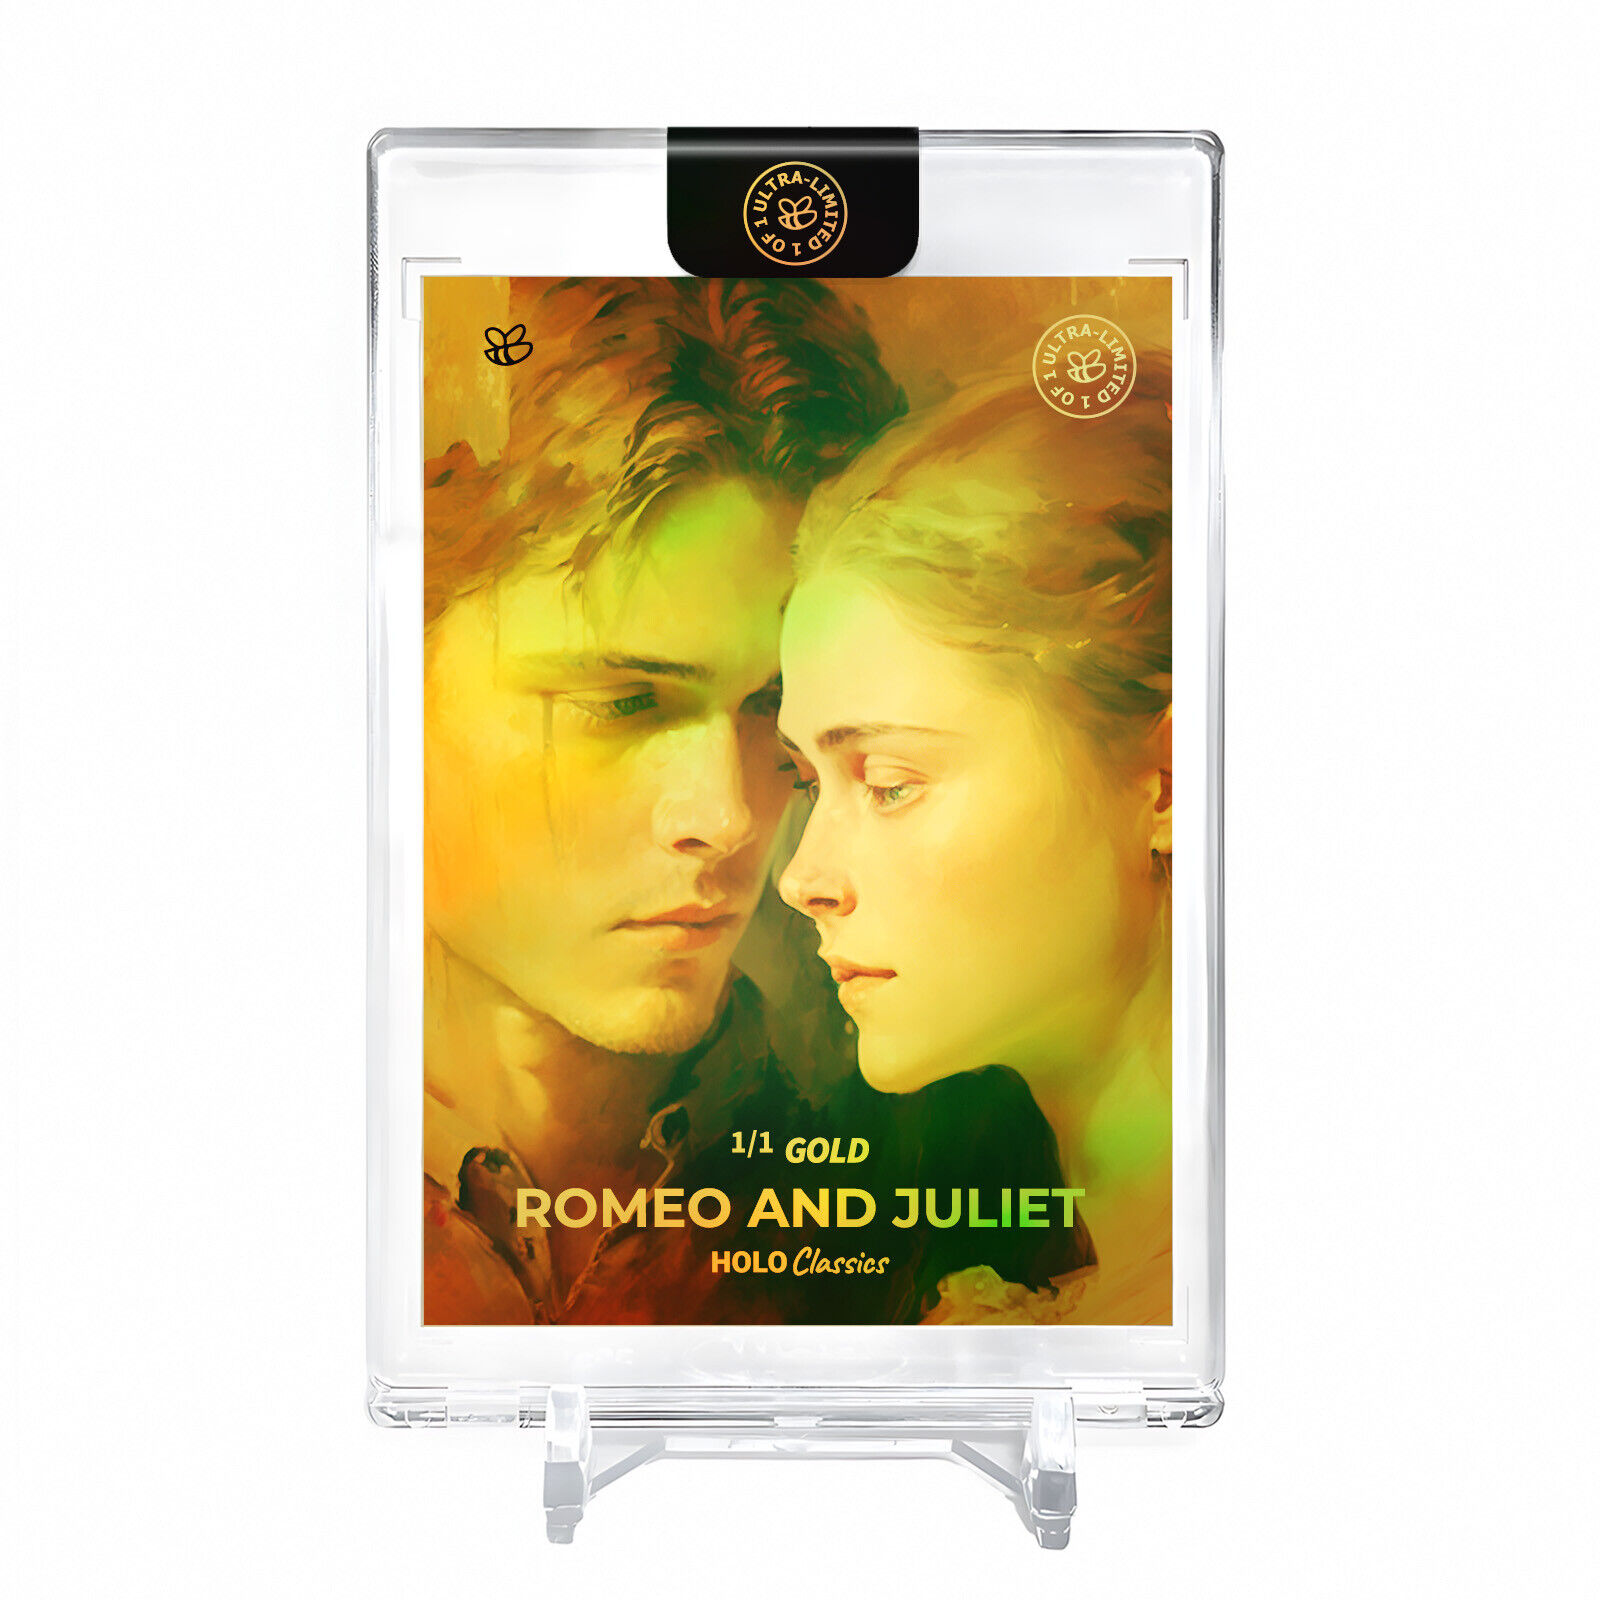 ROMEO AND JULIET Art Trading Card #ROWI *One & Only* Encased Gold 1/1